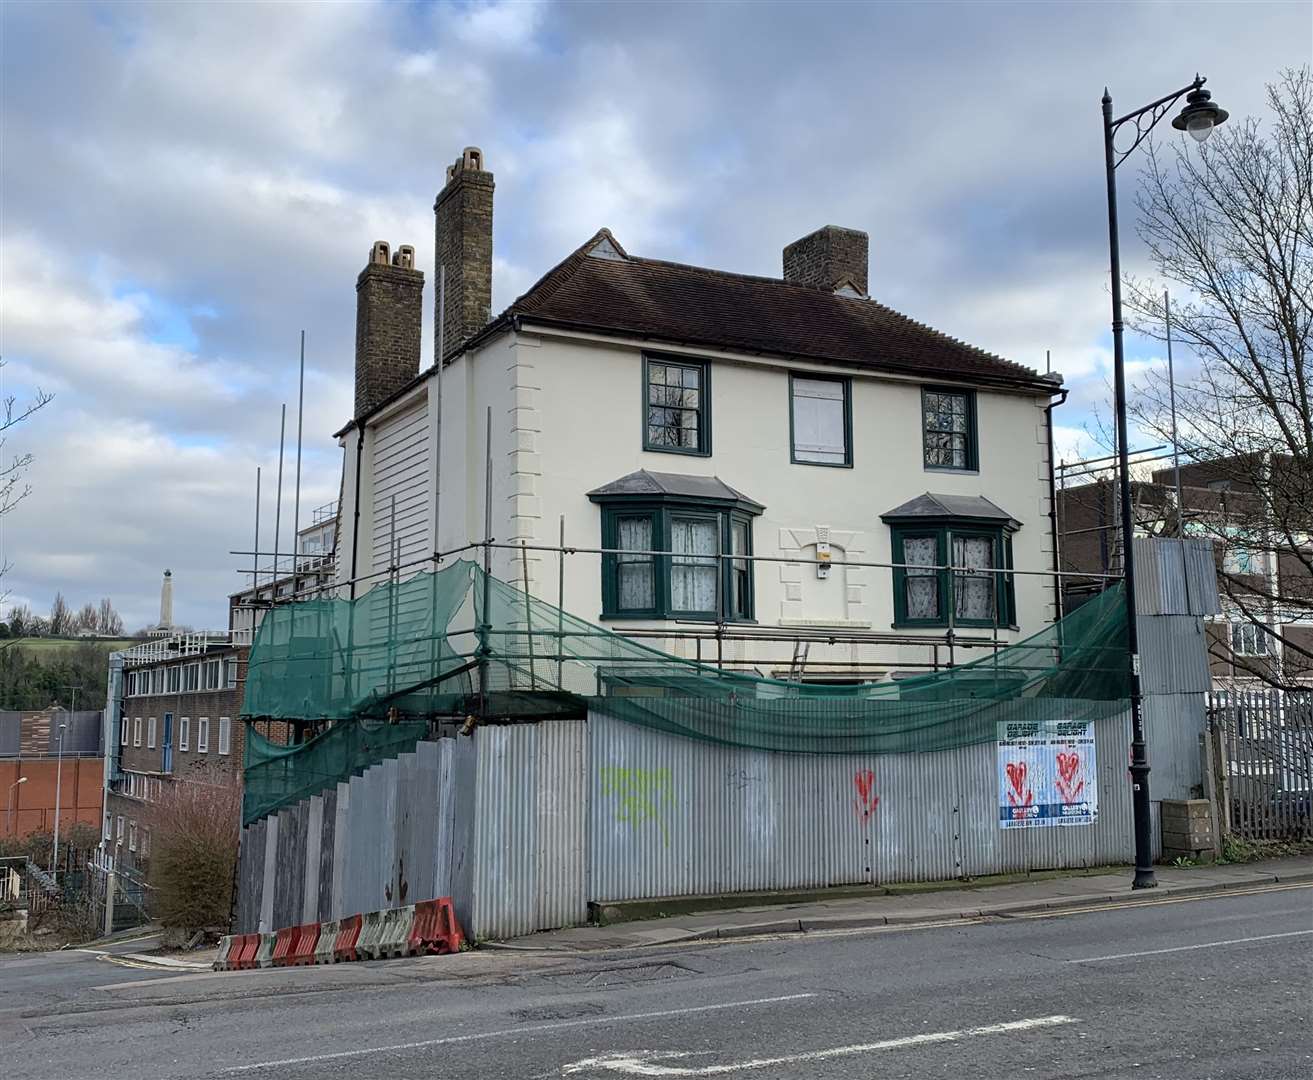 Boarded up - the old Lord Duncan pub